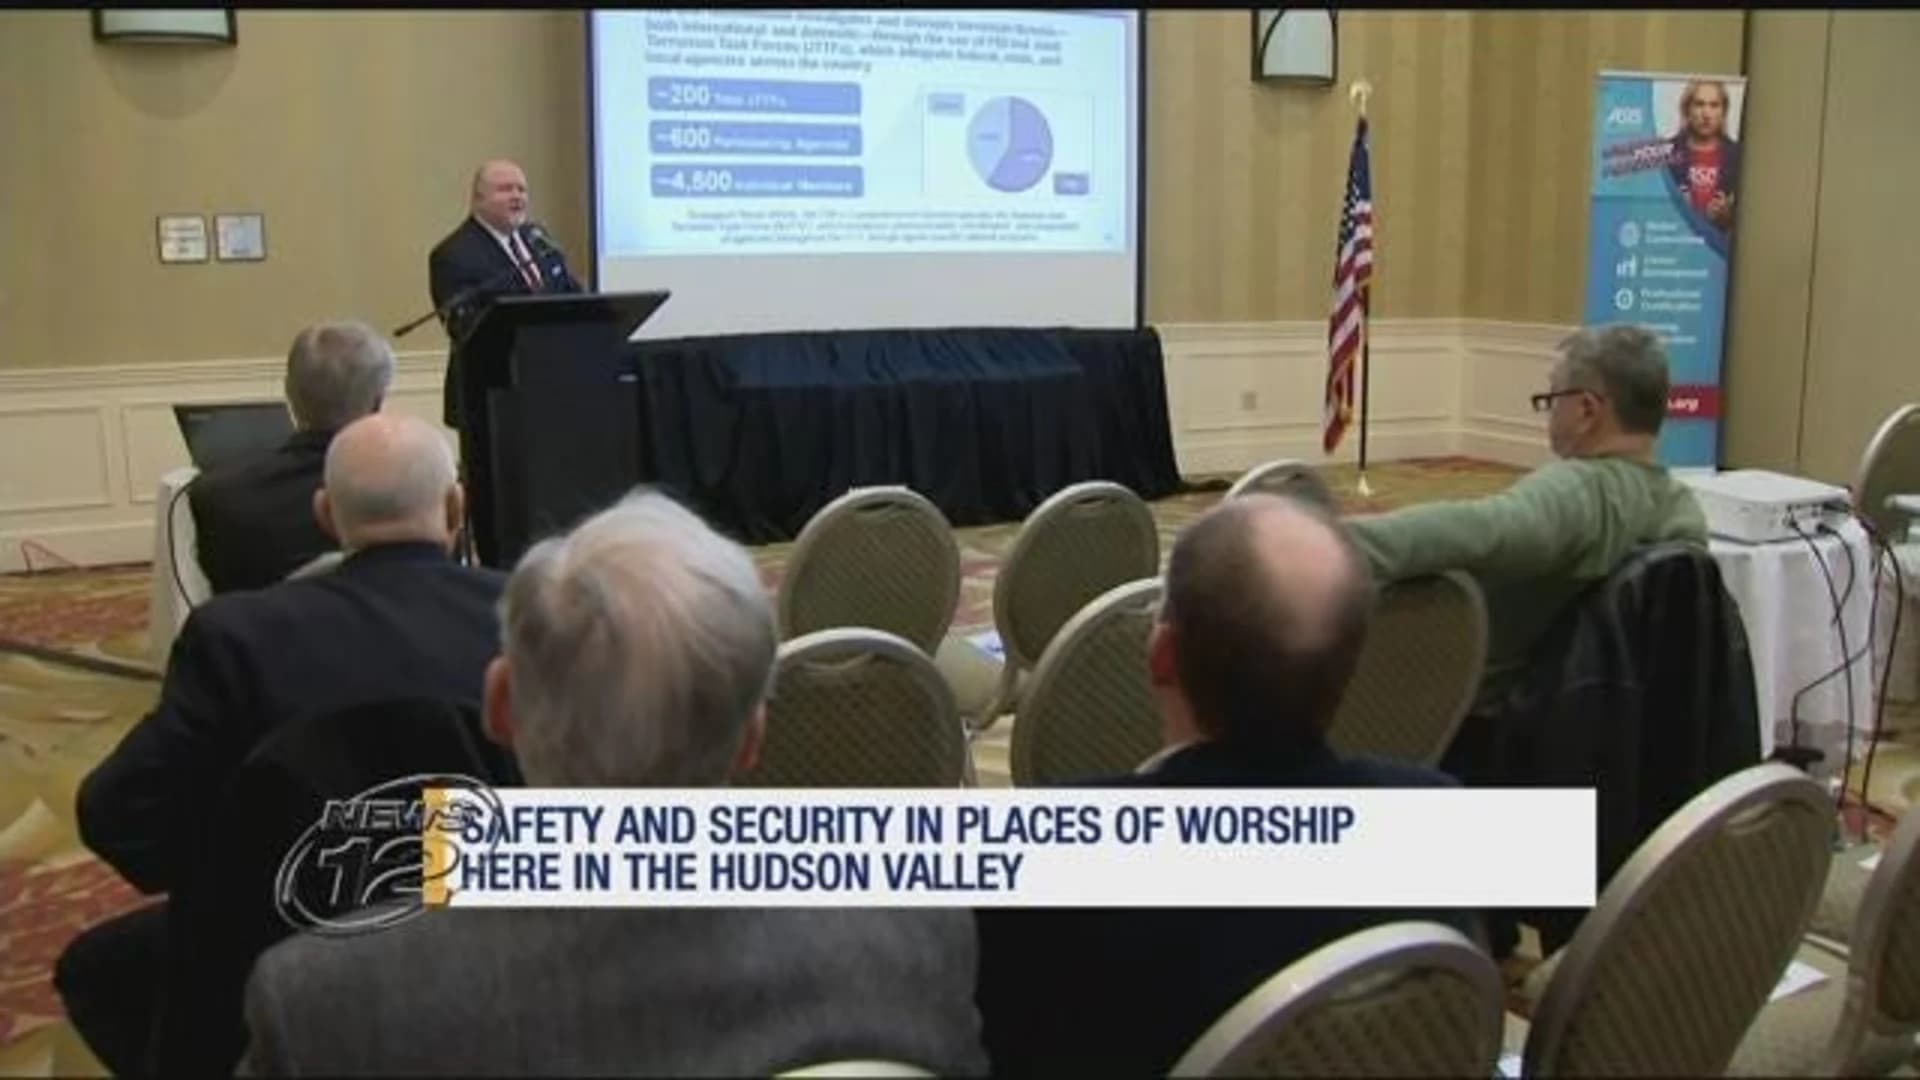 Forum focuses on better ways to secure houses of worship